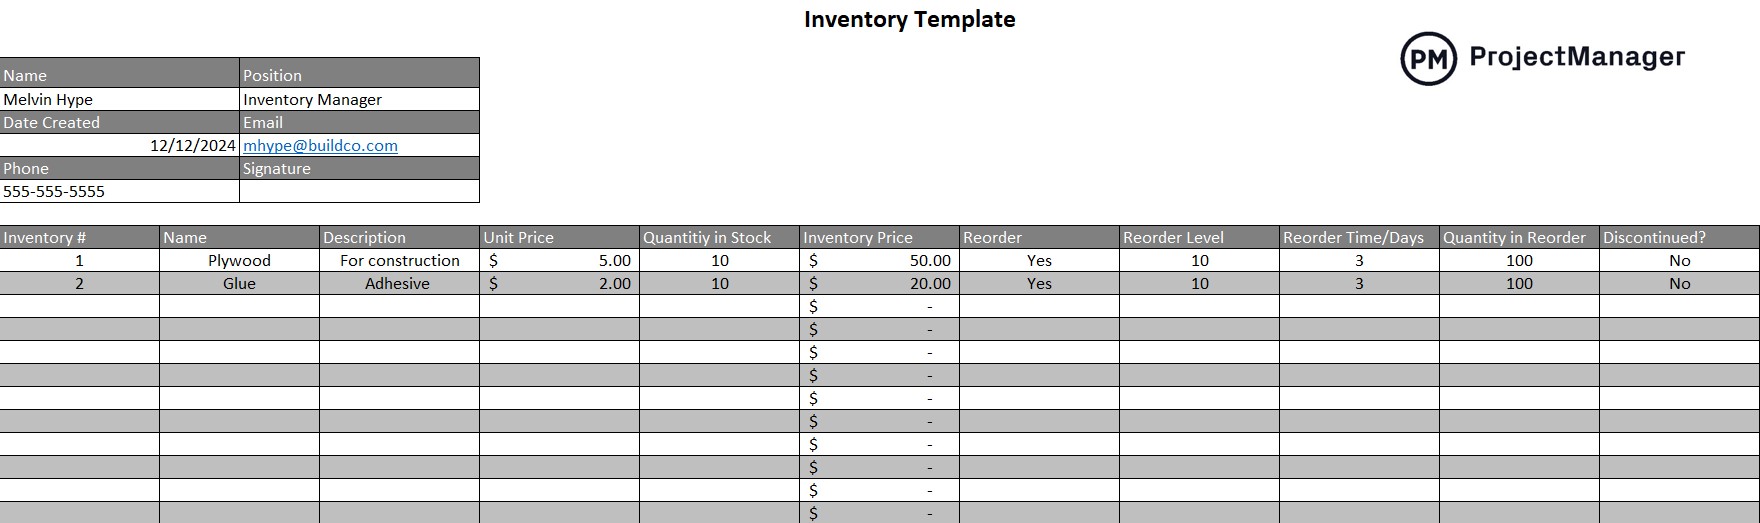 Inventory template